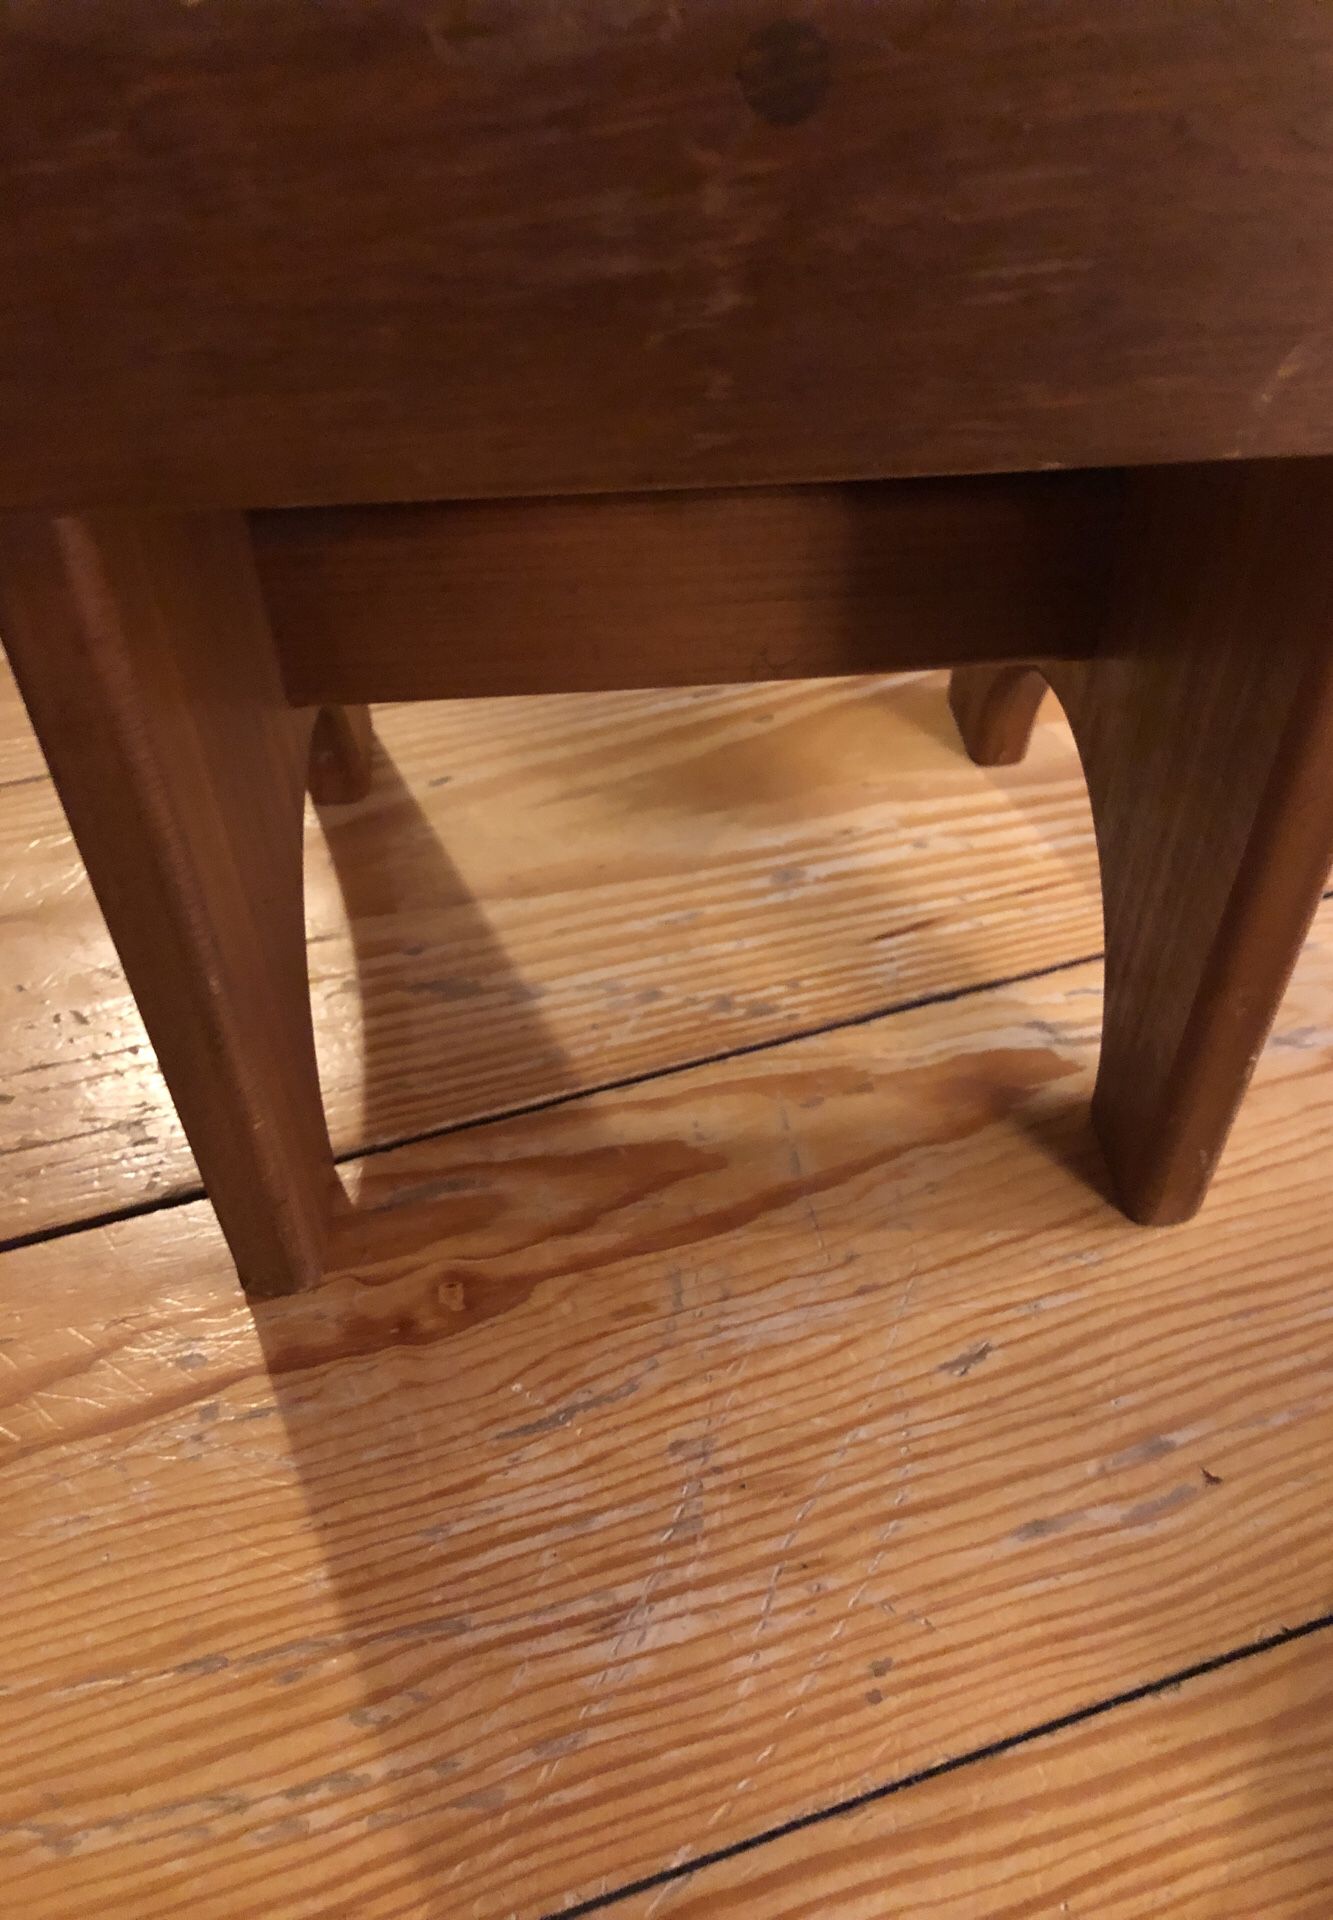 Stool or small table